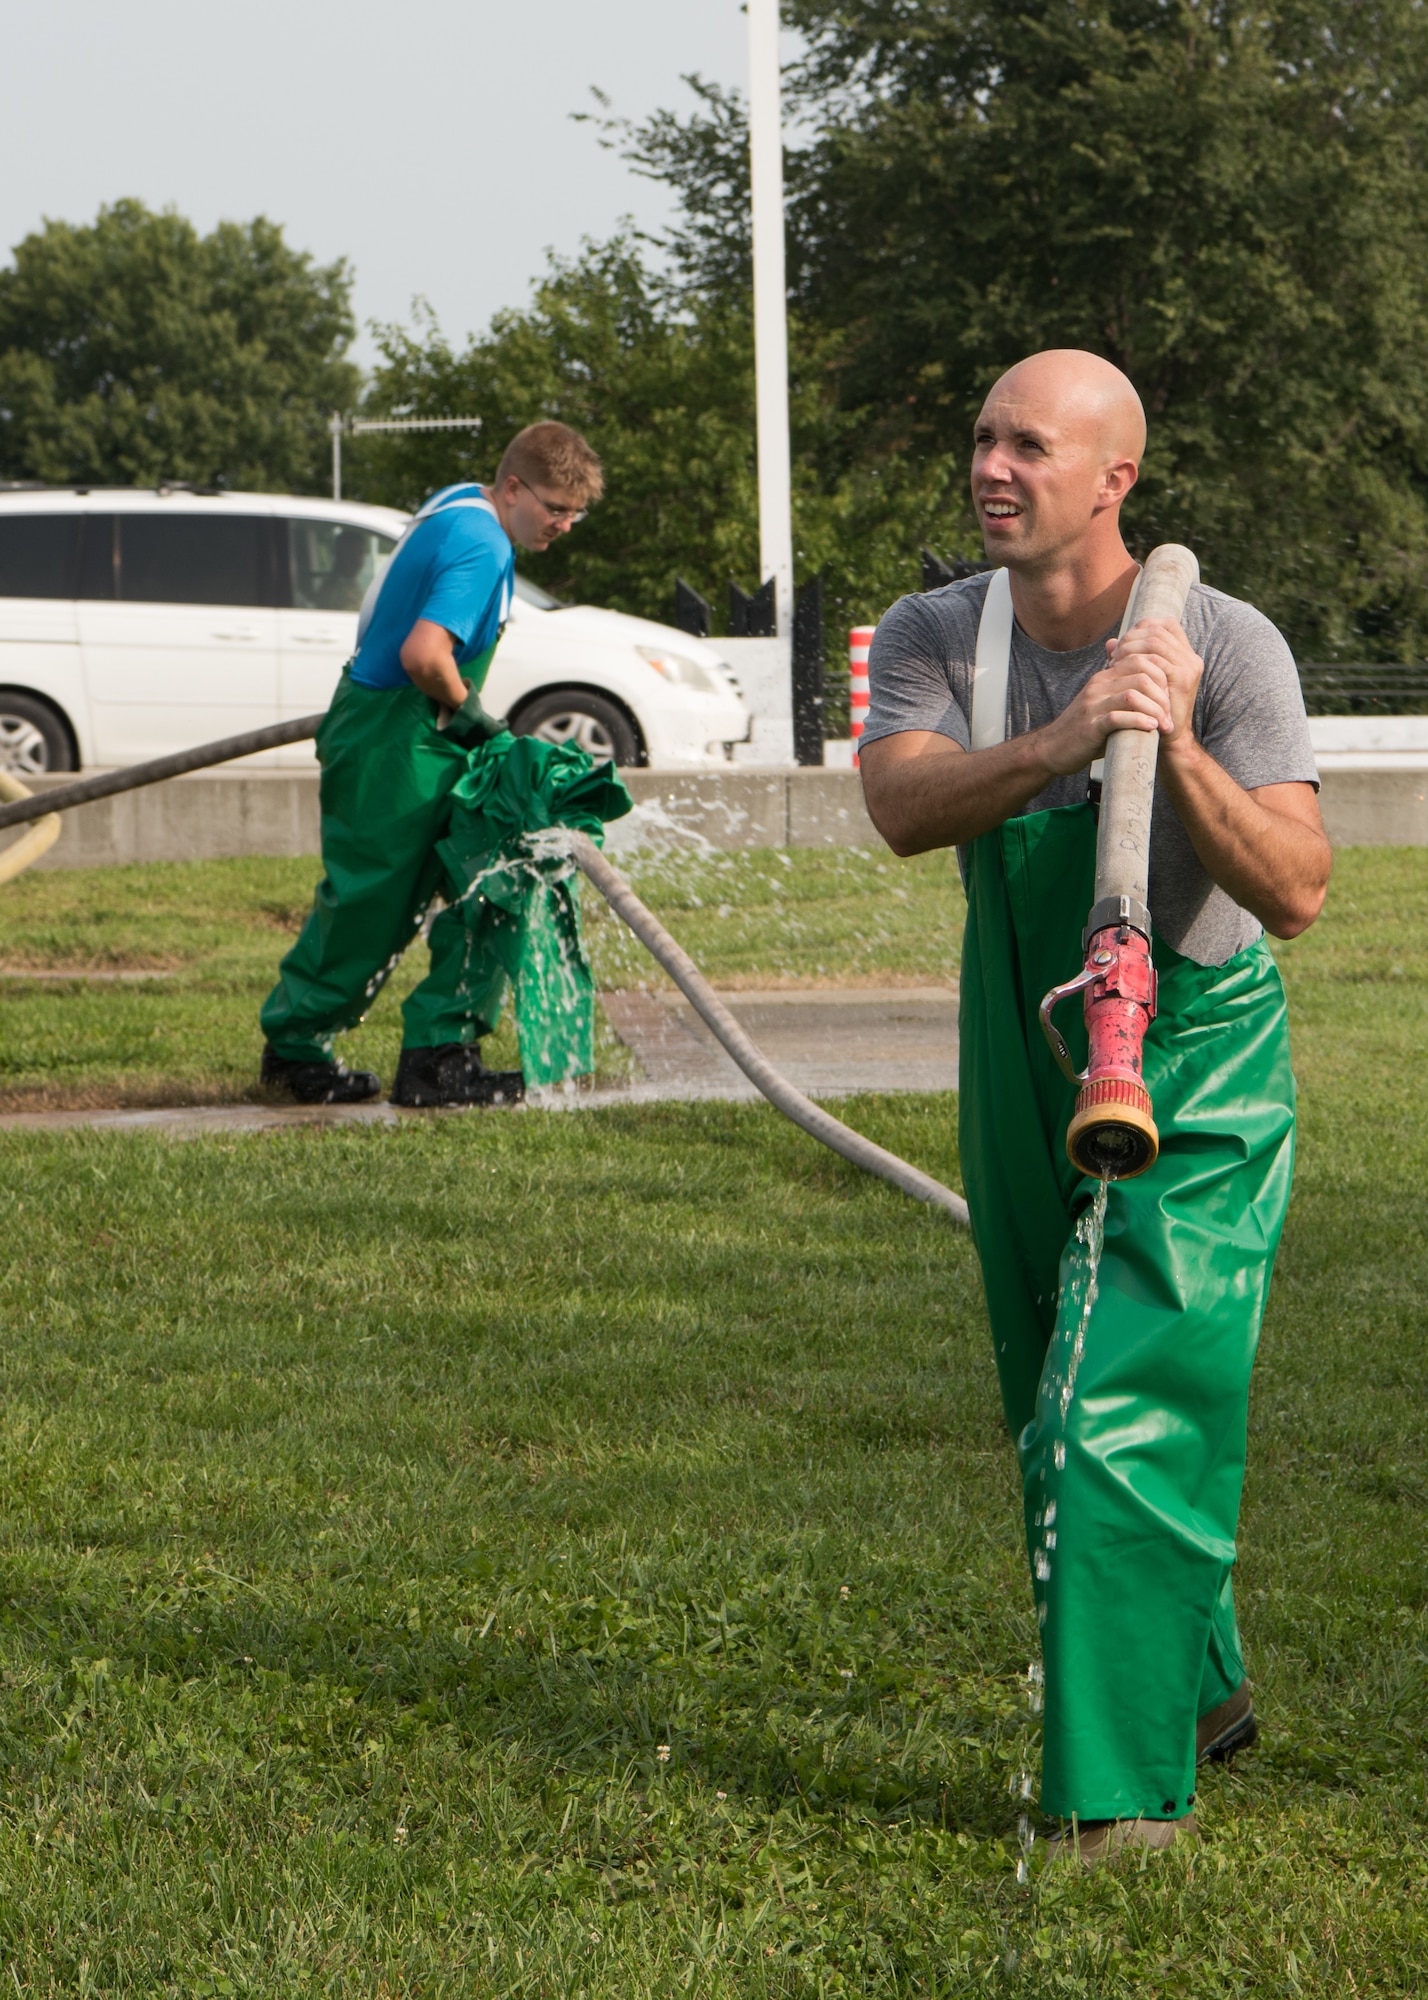 Two Airmen carry a fire hose.